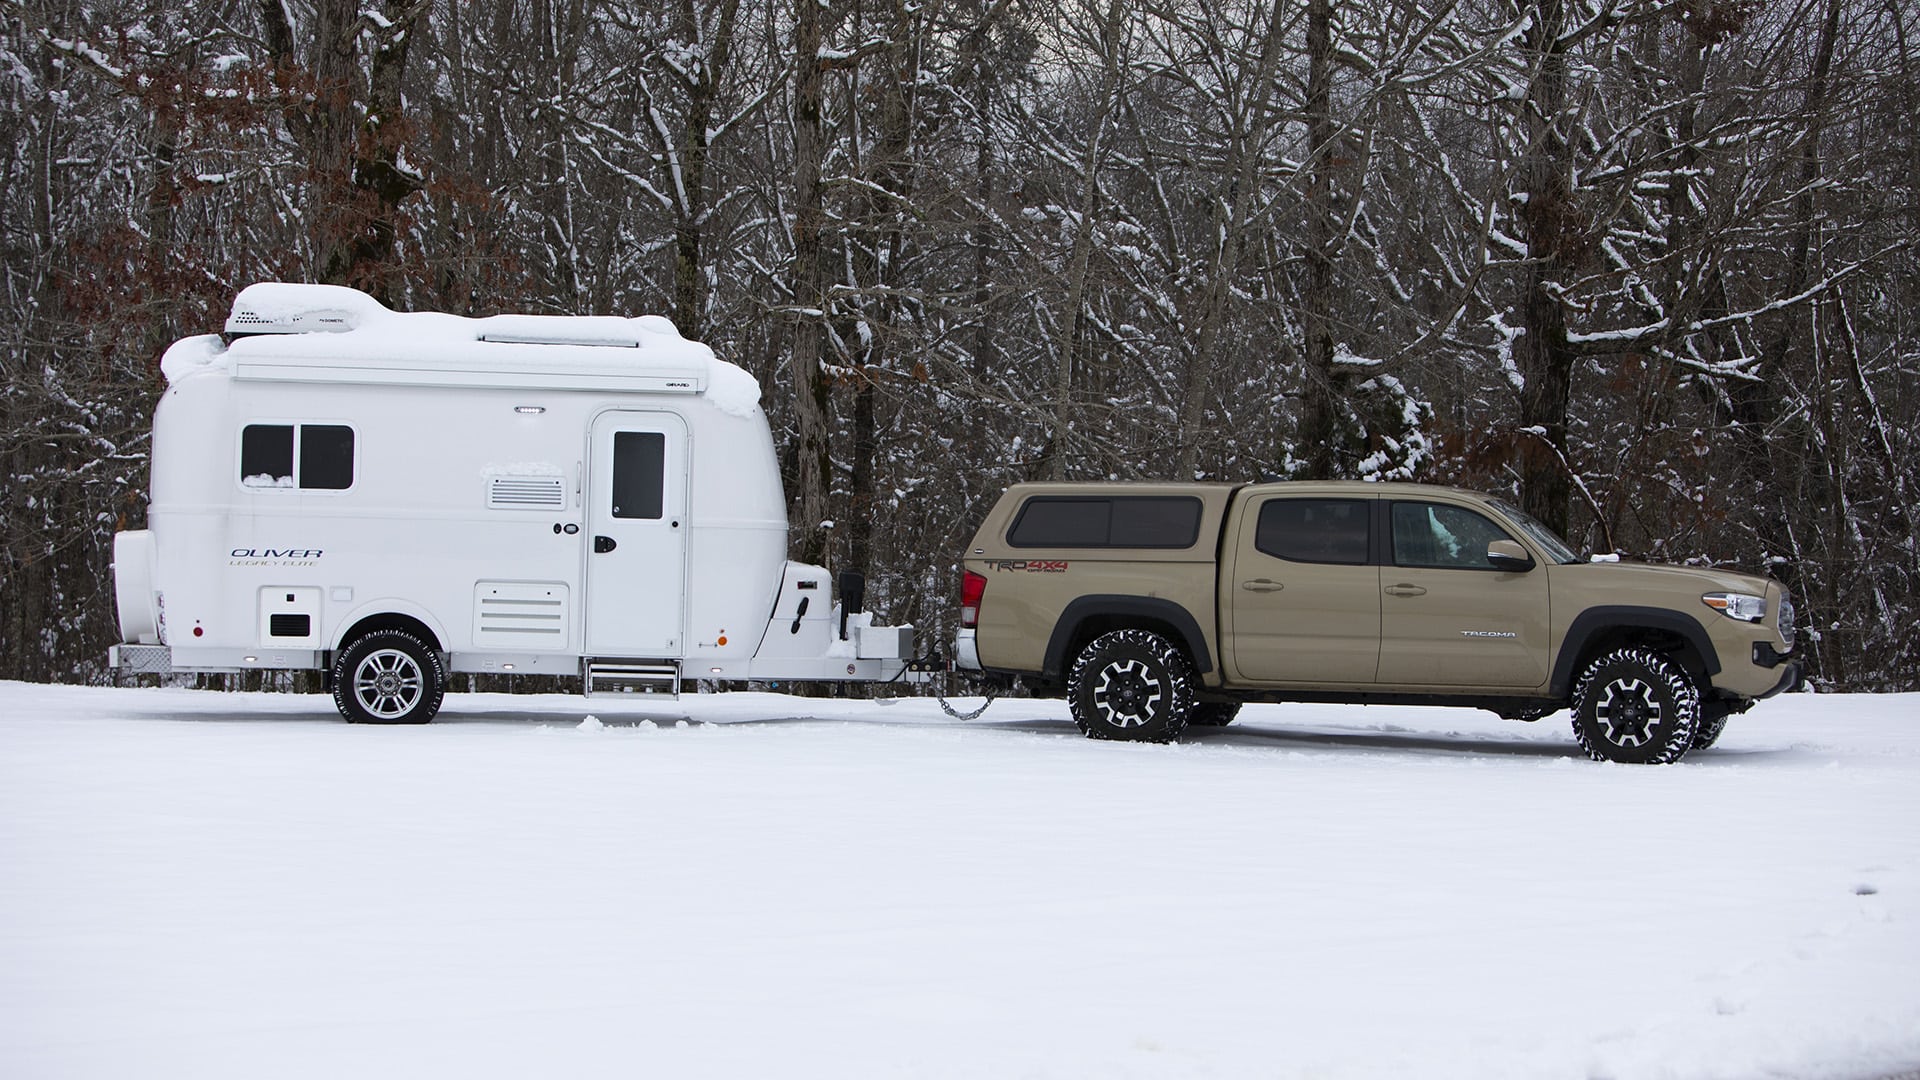 Small Travel Trailer in Snow